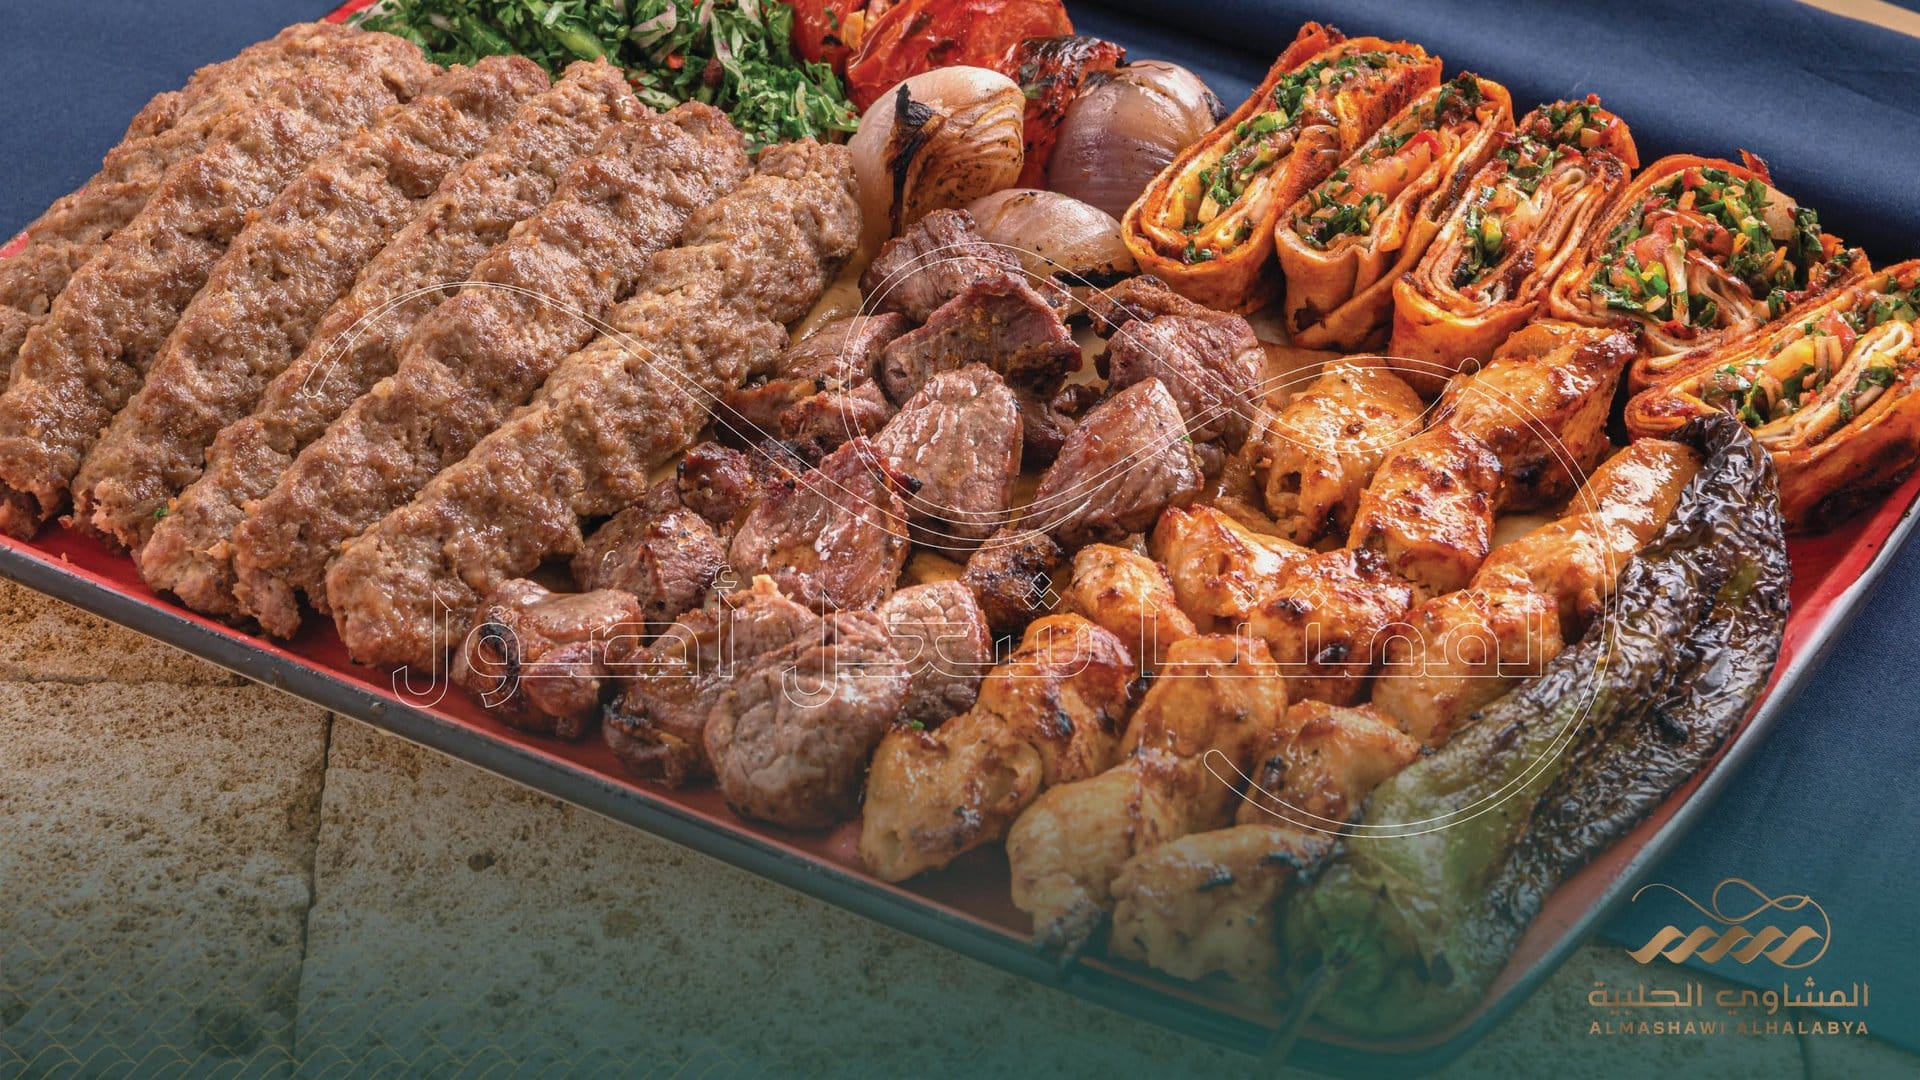 Satisfy Your Cravings with an Authentic Taste of BBQ: Enjoy Our Delicious Barbeque in Sharjah